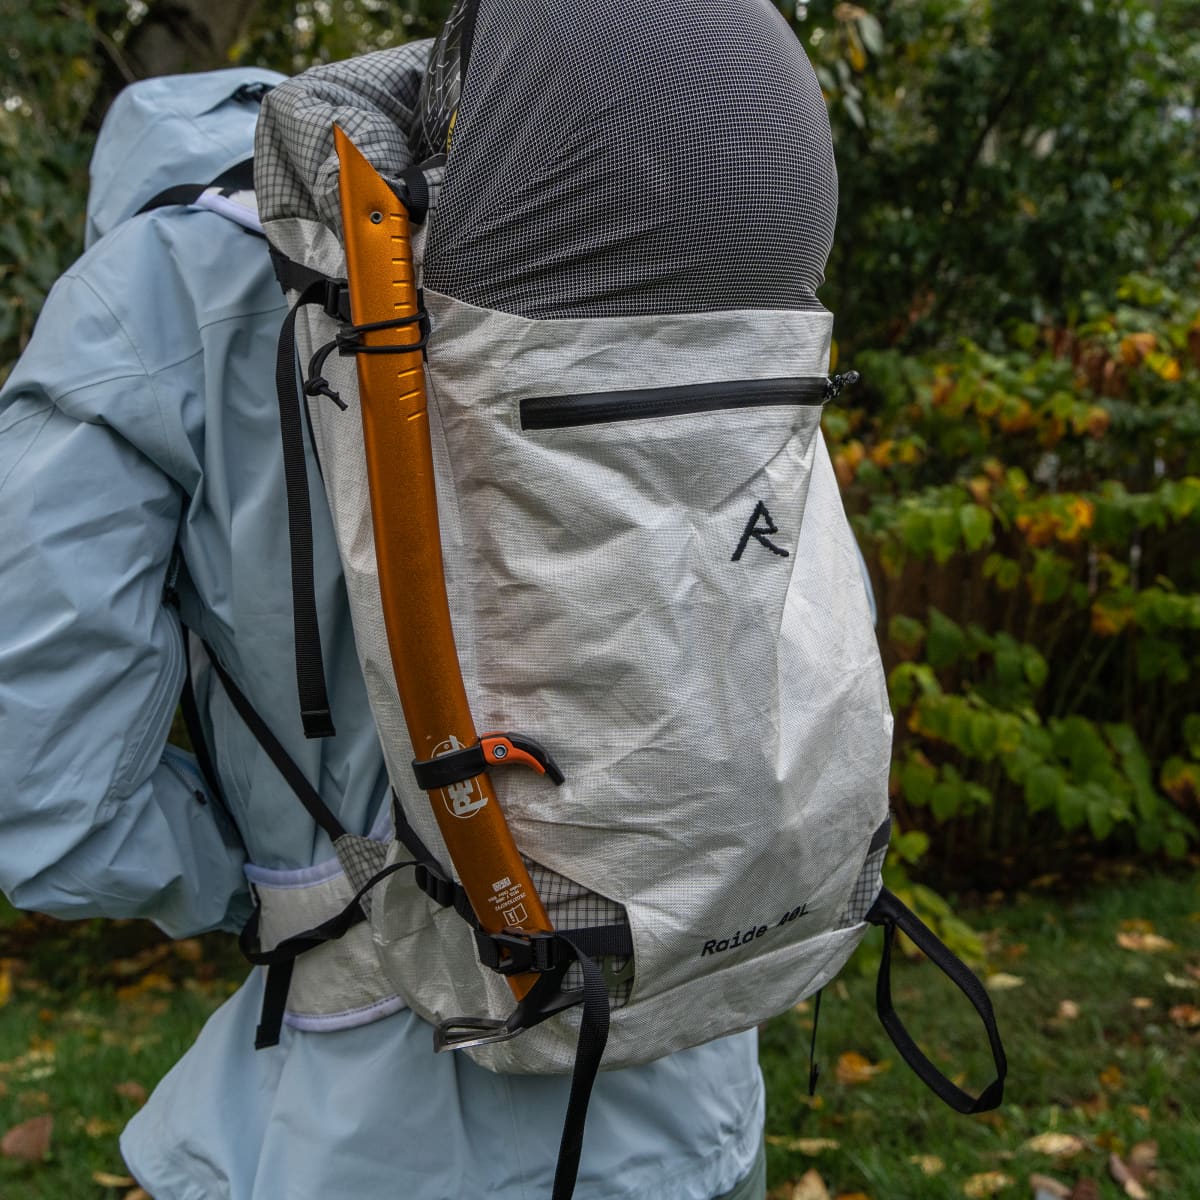 Introducing the Raide Research LF 40L Pack - Powder